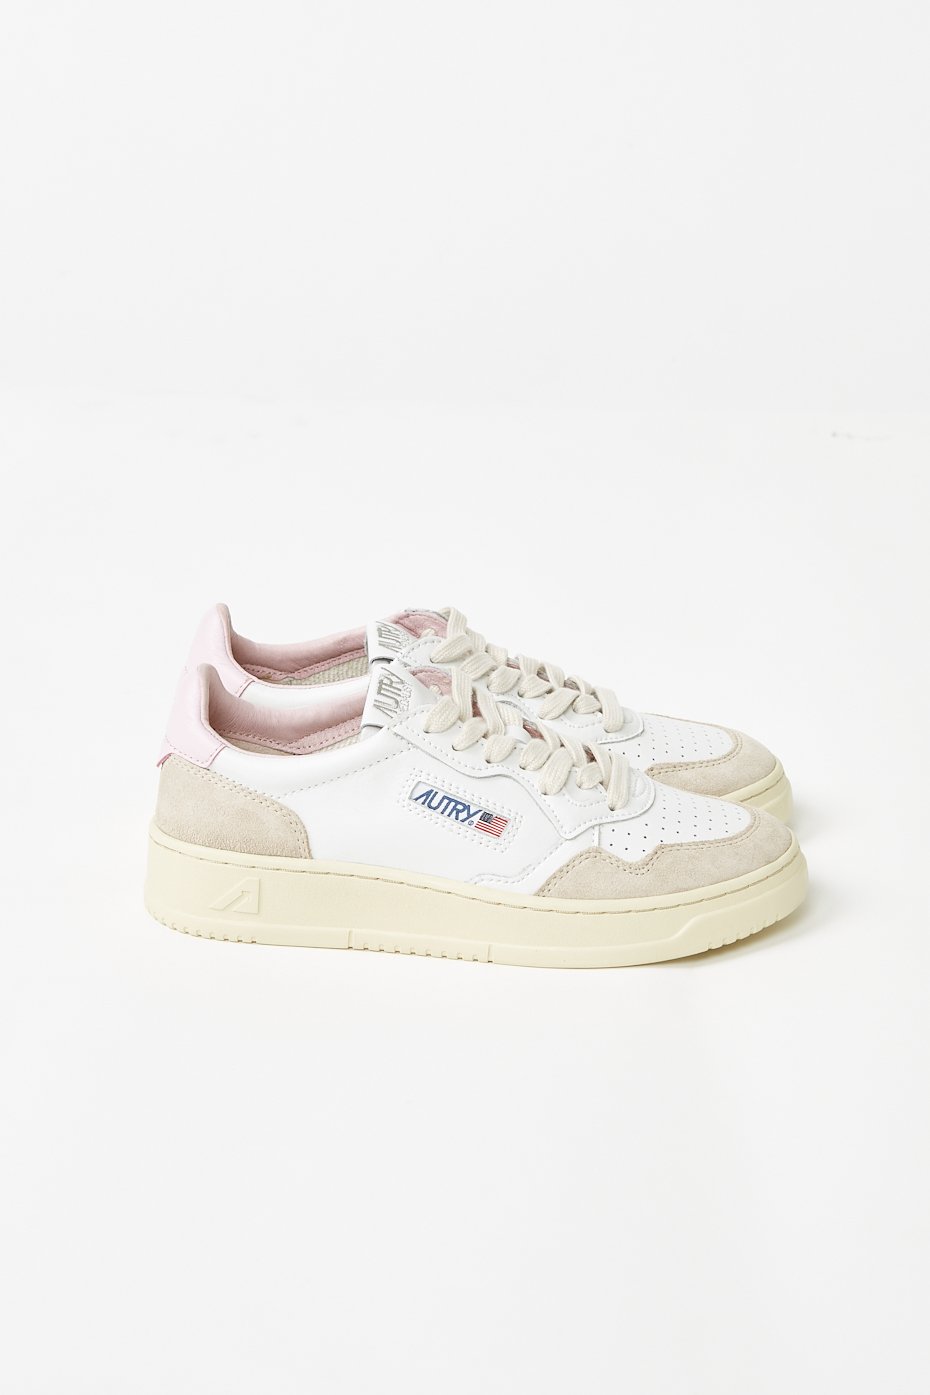 Autry Dallas Low White Pink Leather Suede Sneakers Womens